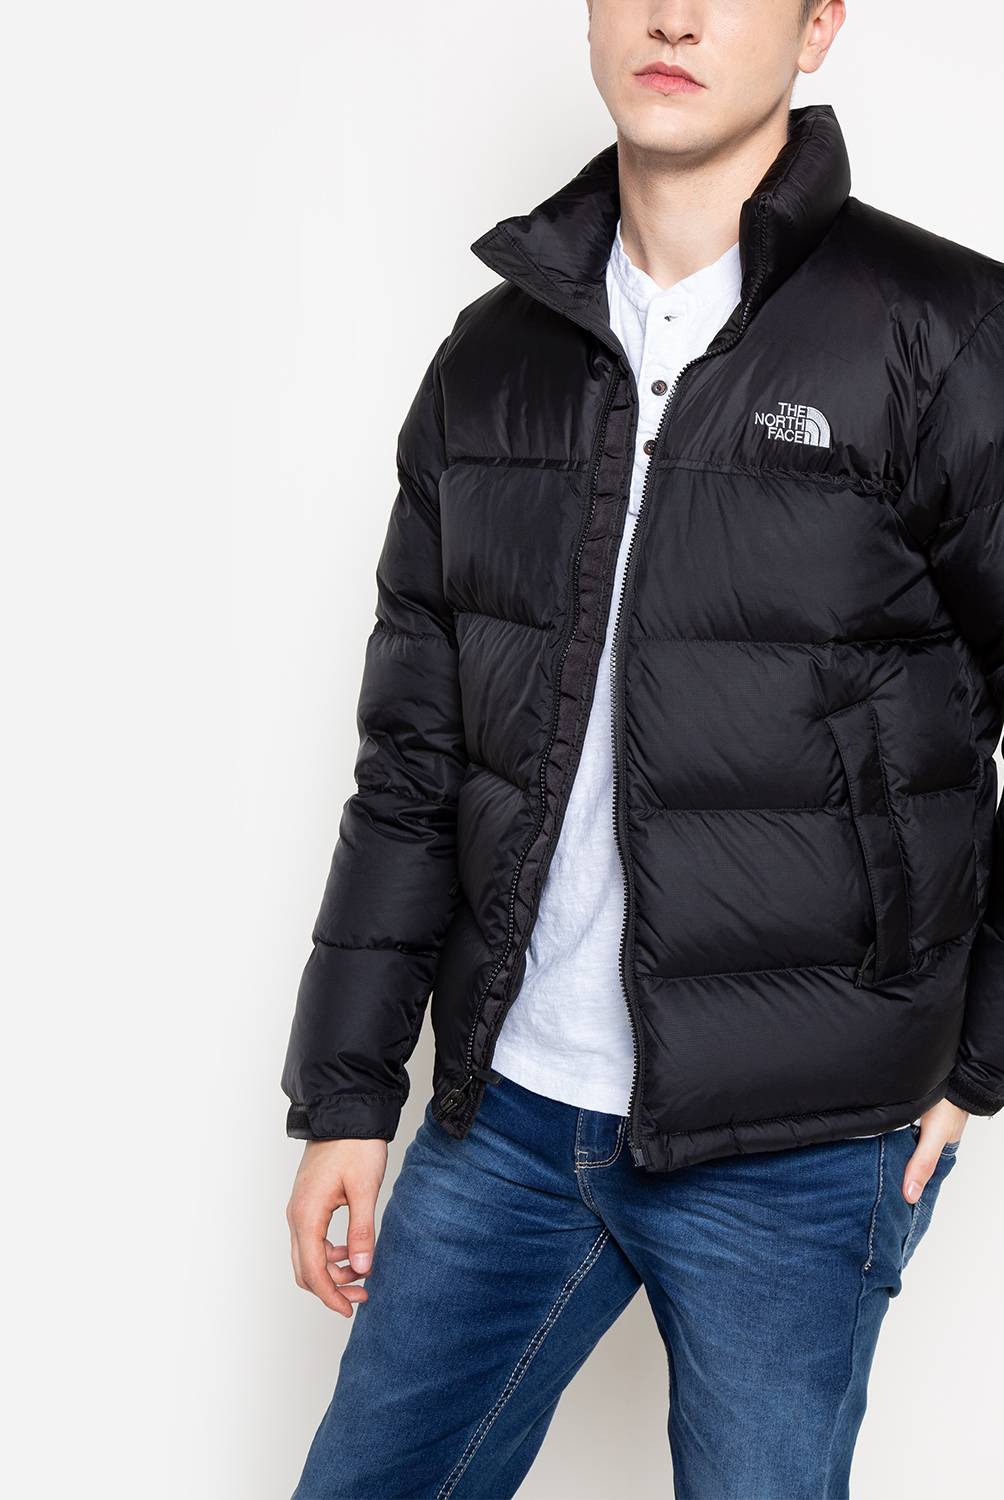 THE NORTH FACE - North face Parka hombre